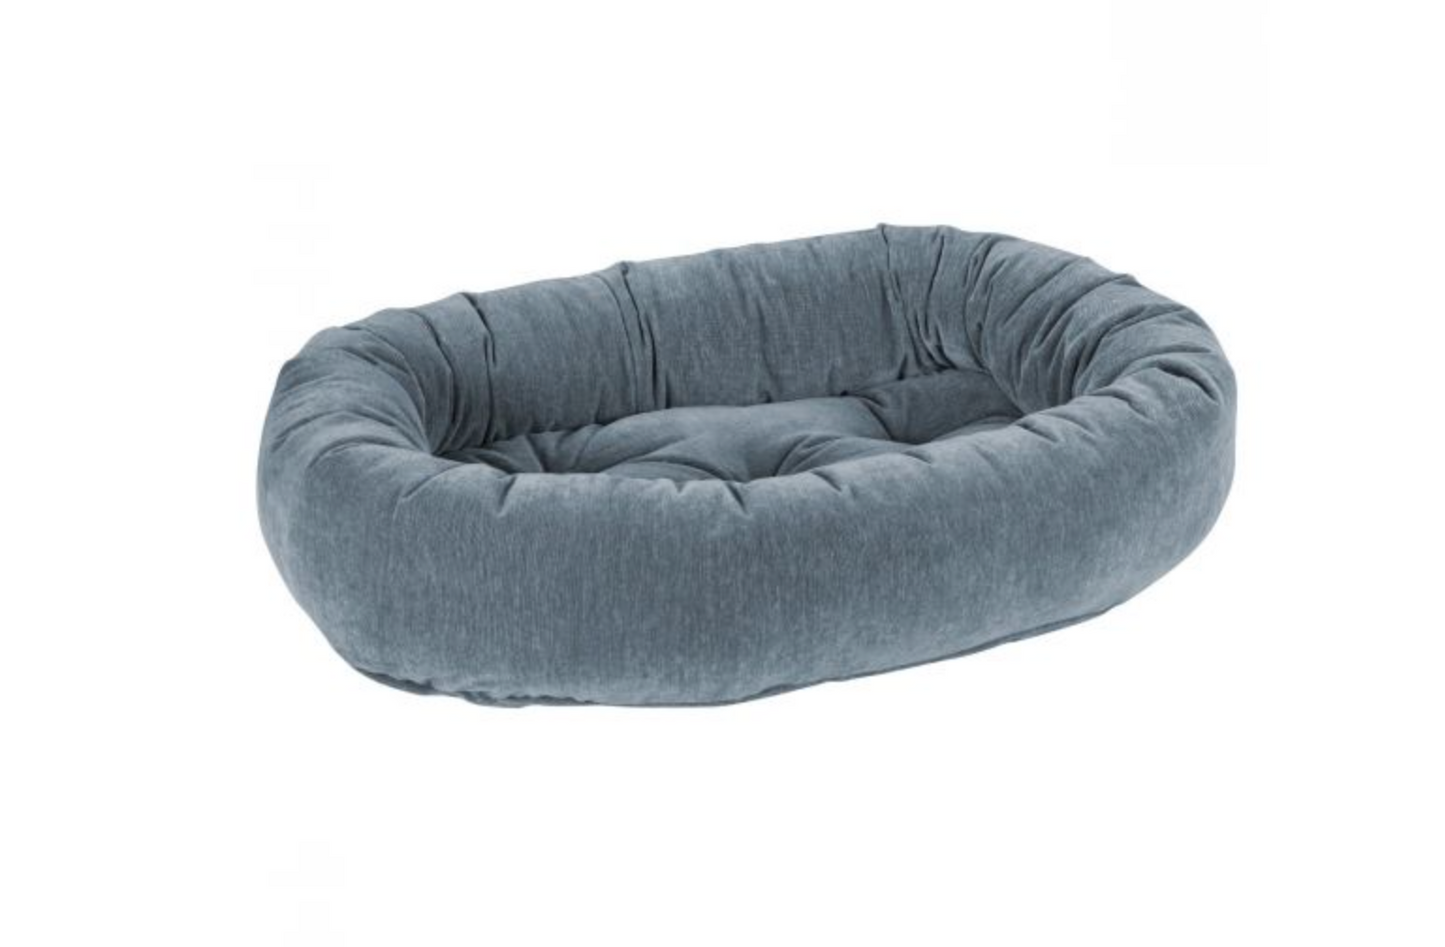 Donut Pet Bed - Mineral